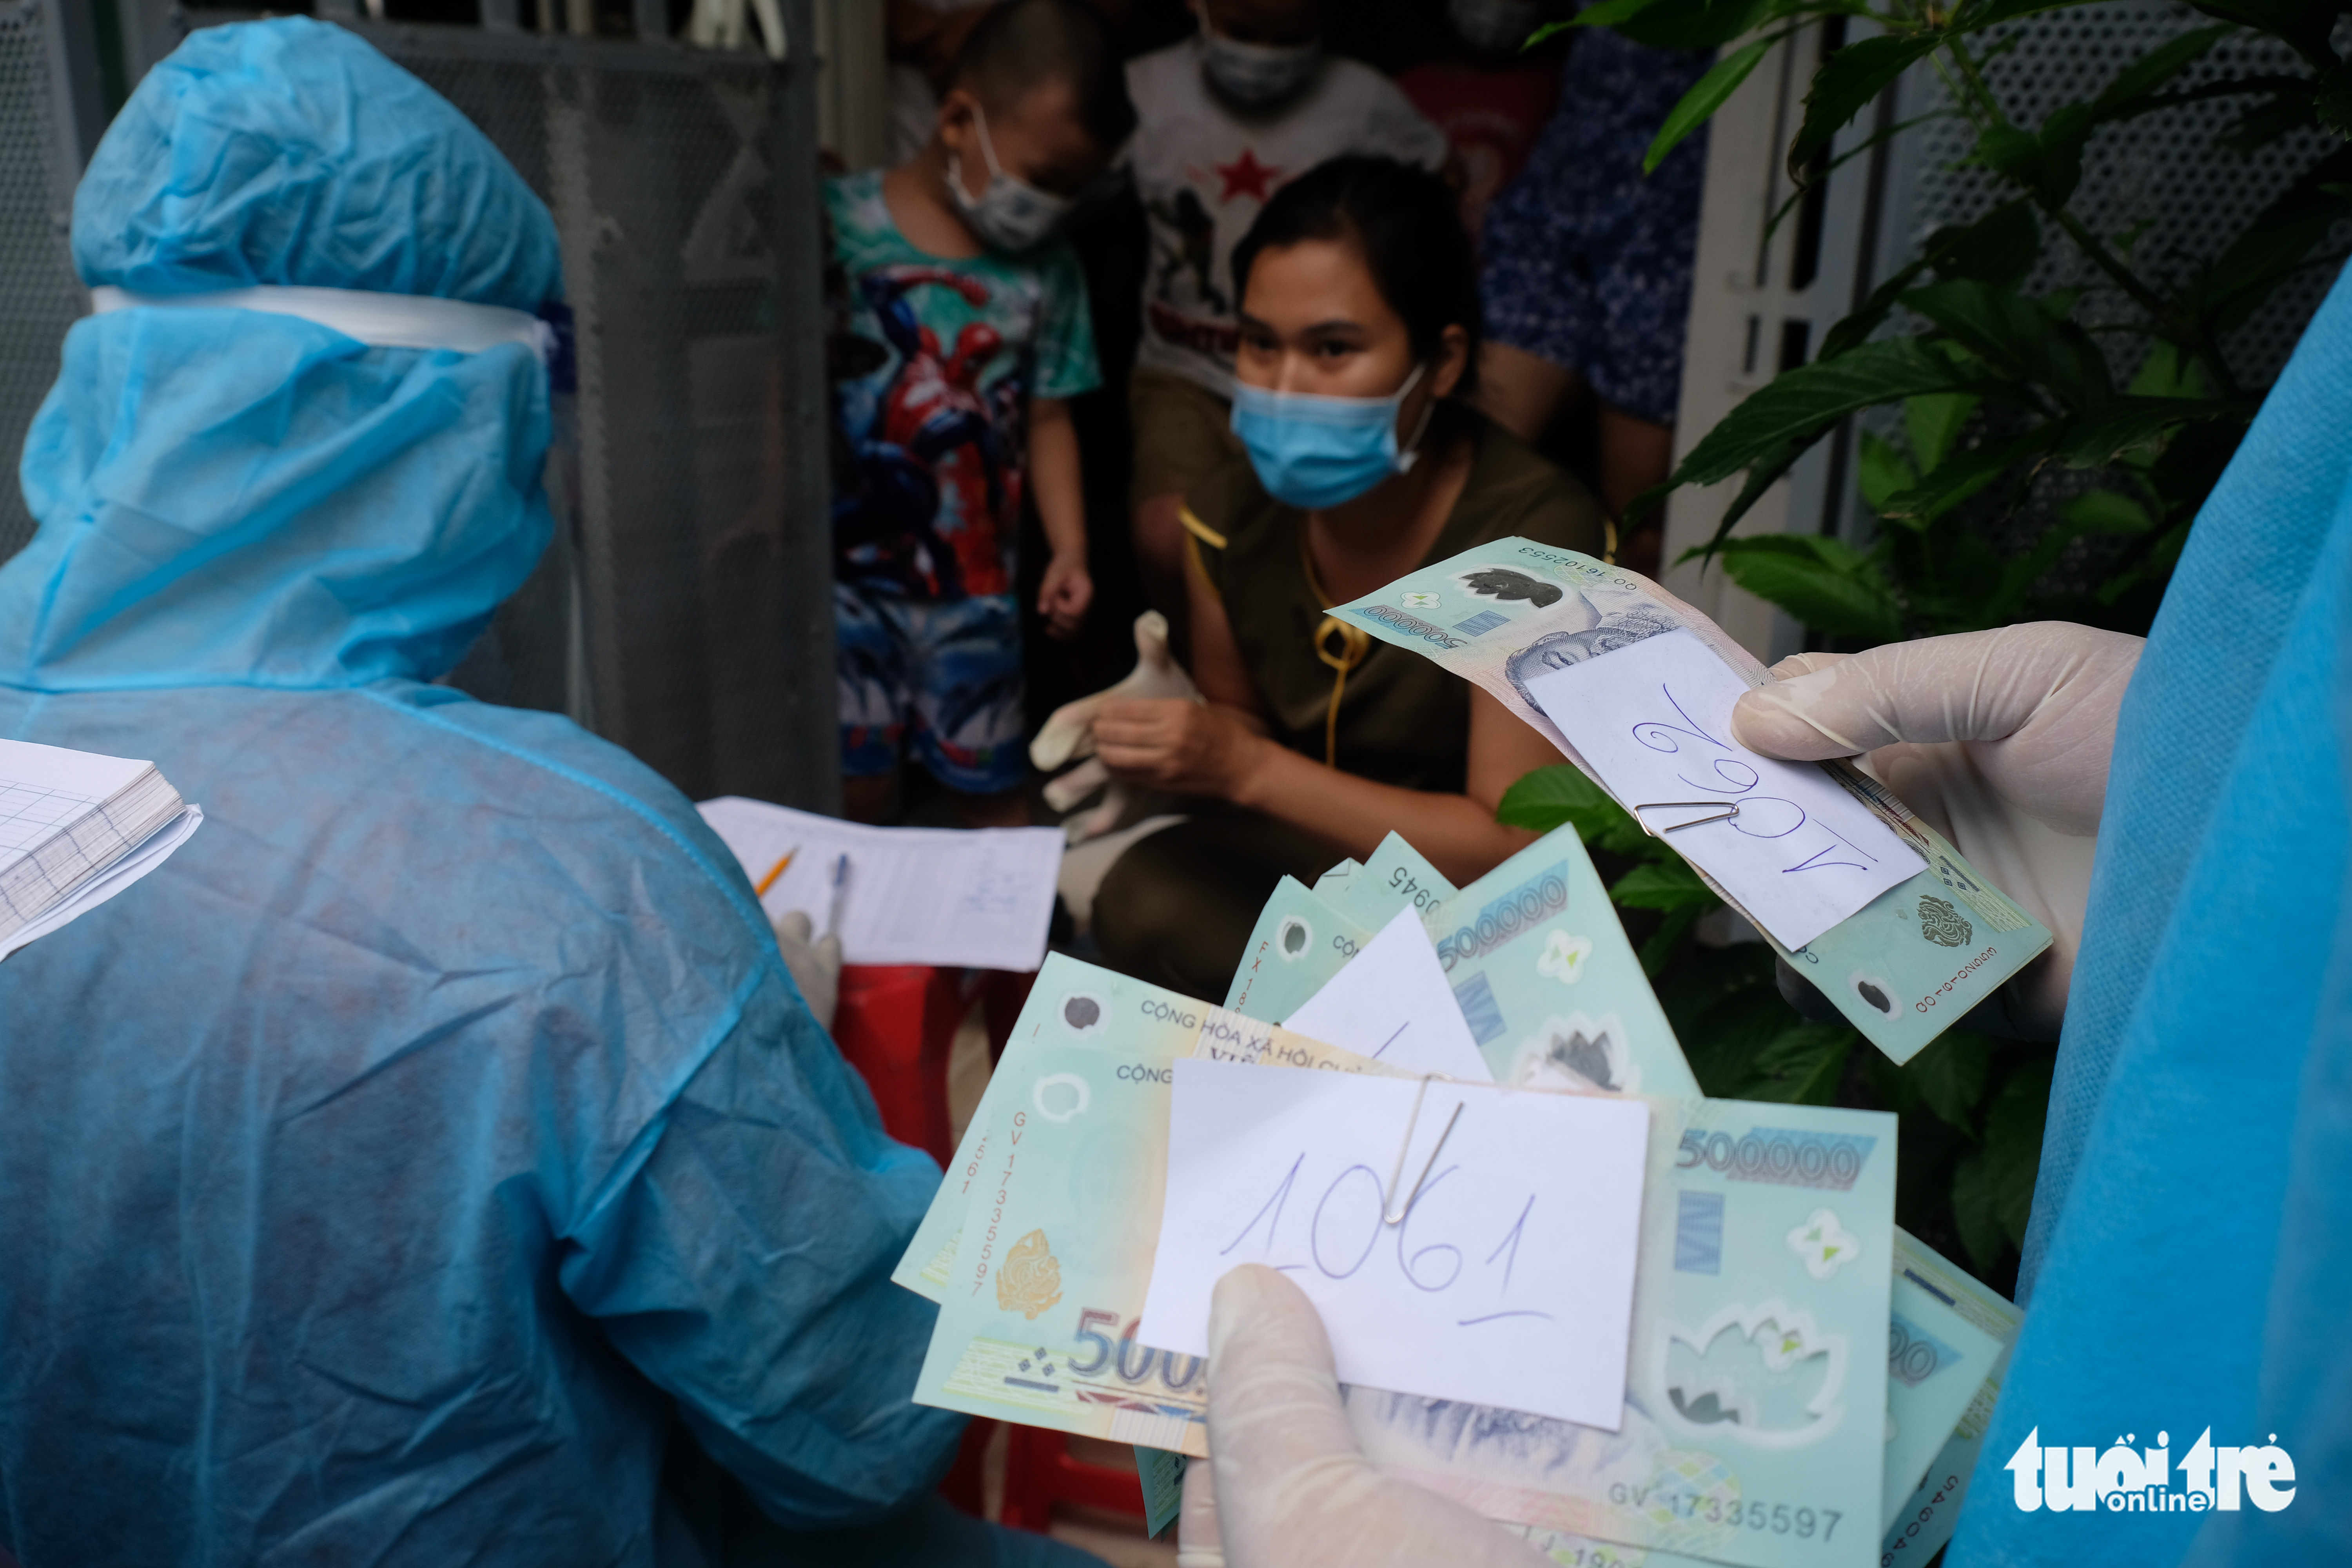 Coronavirus-stricken internal migrant workers in Ho Chi Minh City to receive aid from Oxfam, embassies